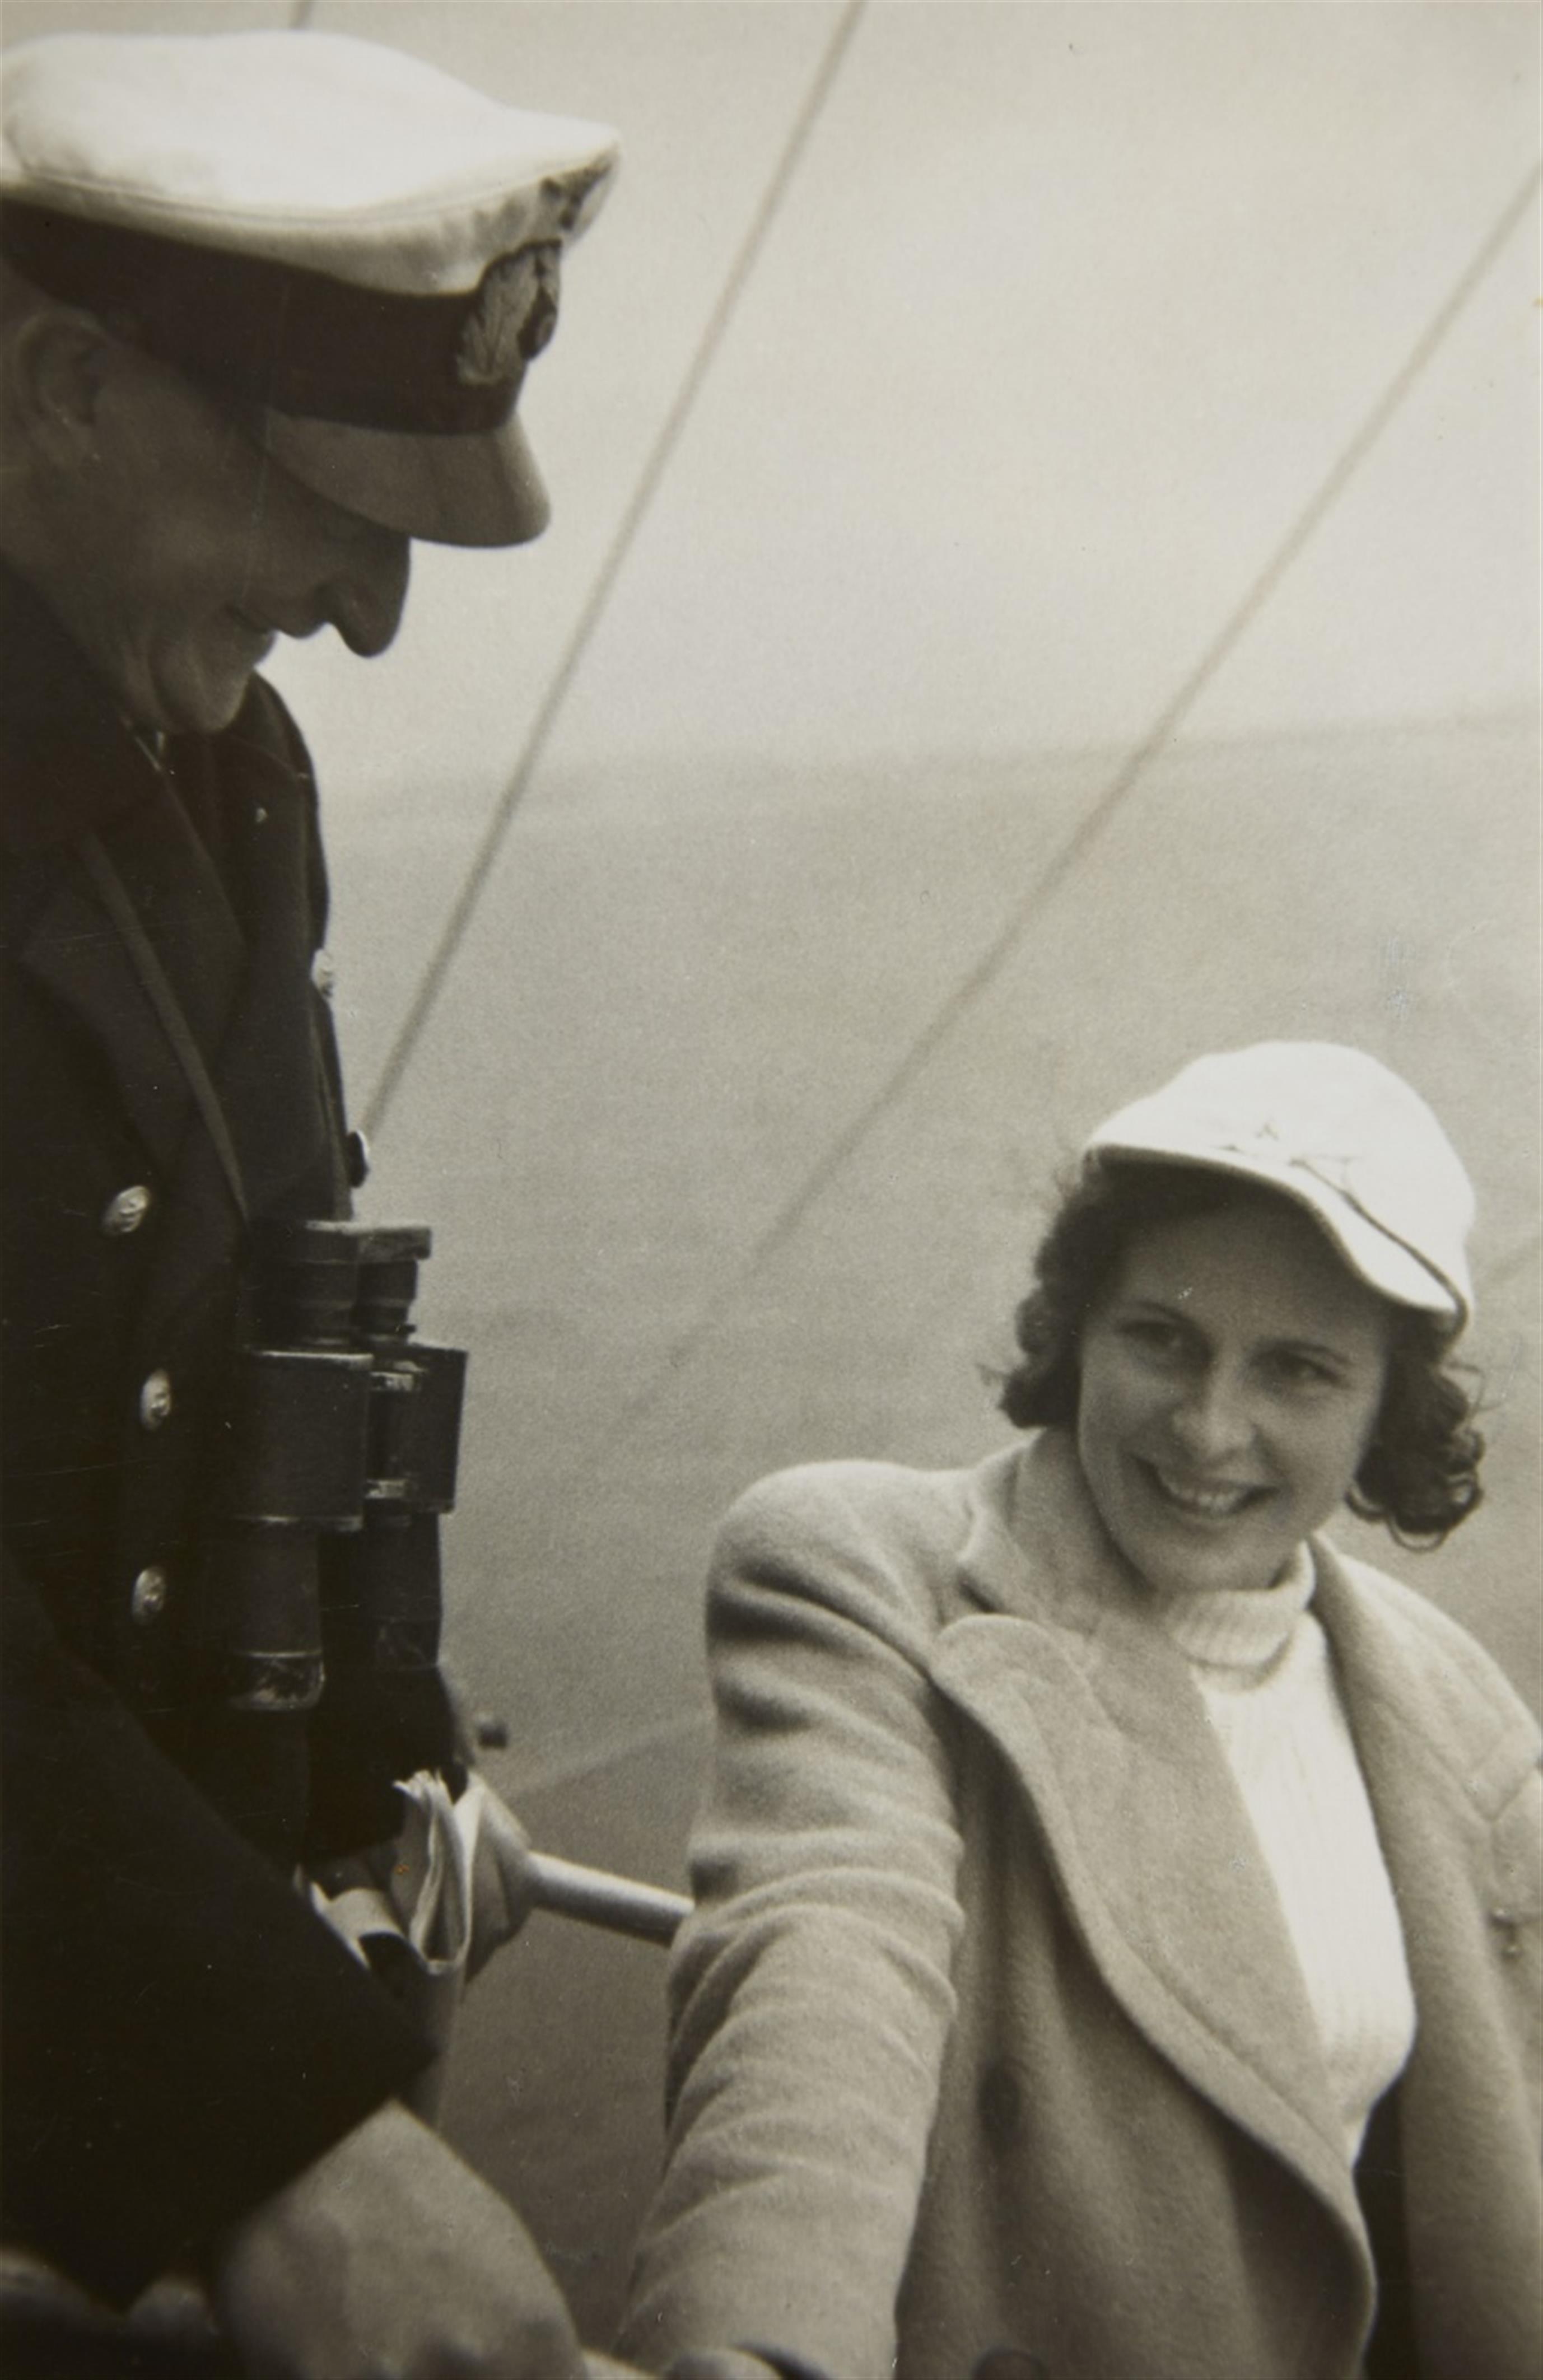 Diverse Photographen - Leni Riefenstahl beim Dreh des "Olympia"-Films (Leni Riefenstahl during the filming of "Olympia")